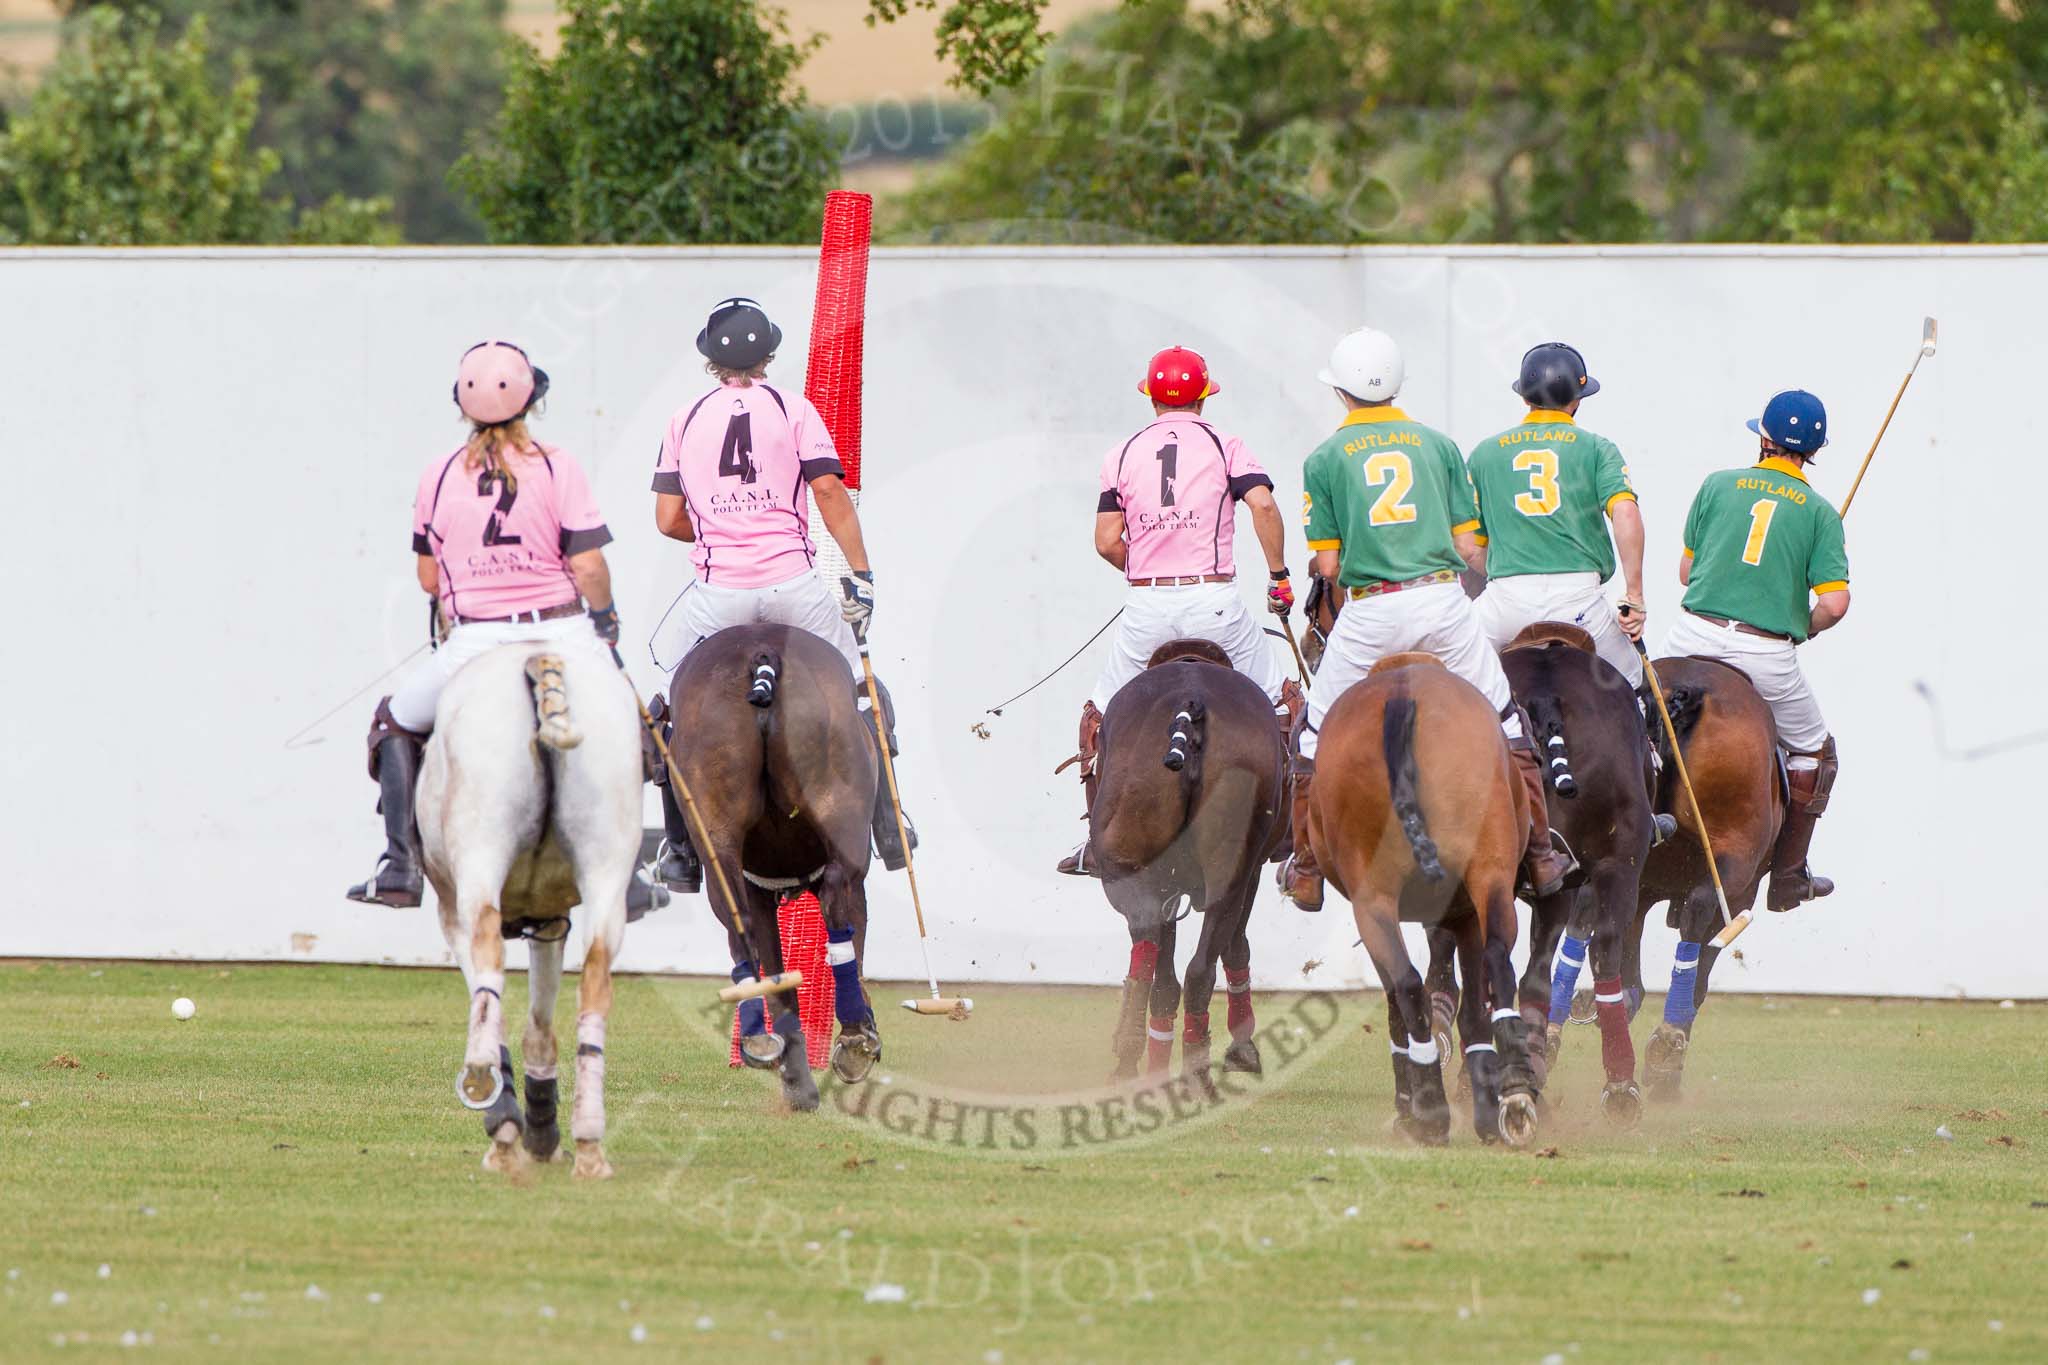 DBPC Polo in the Park 2013, Final of the Tusk Trophy (4 Goals), Rutland vs C.A.N.I..
Dallas Burston Polo Club, ,
Southam,
Warwickshire,
United Kingdom,
on 01 September 2013 at 16:27, image #571